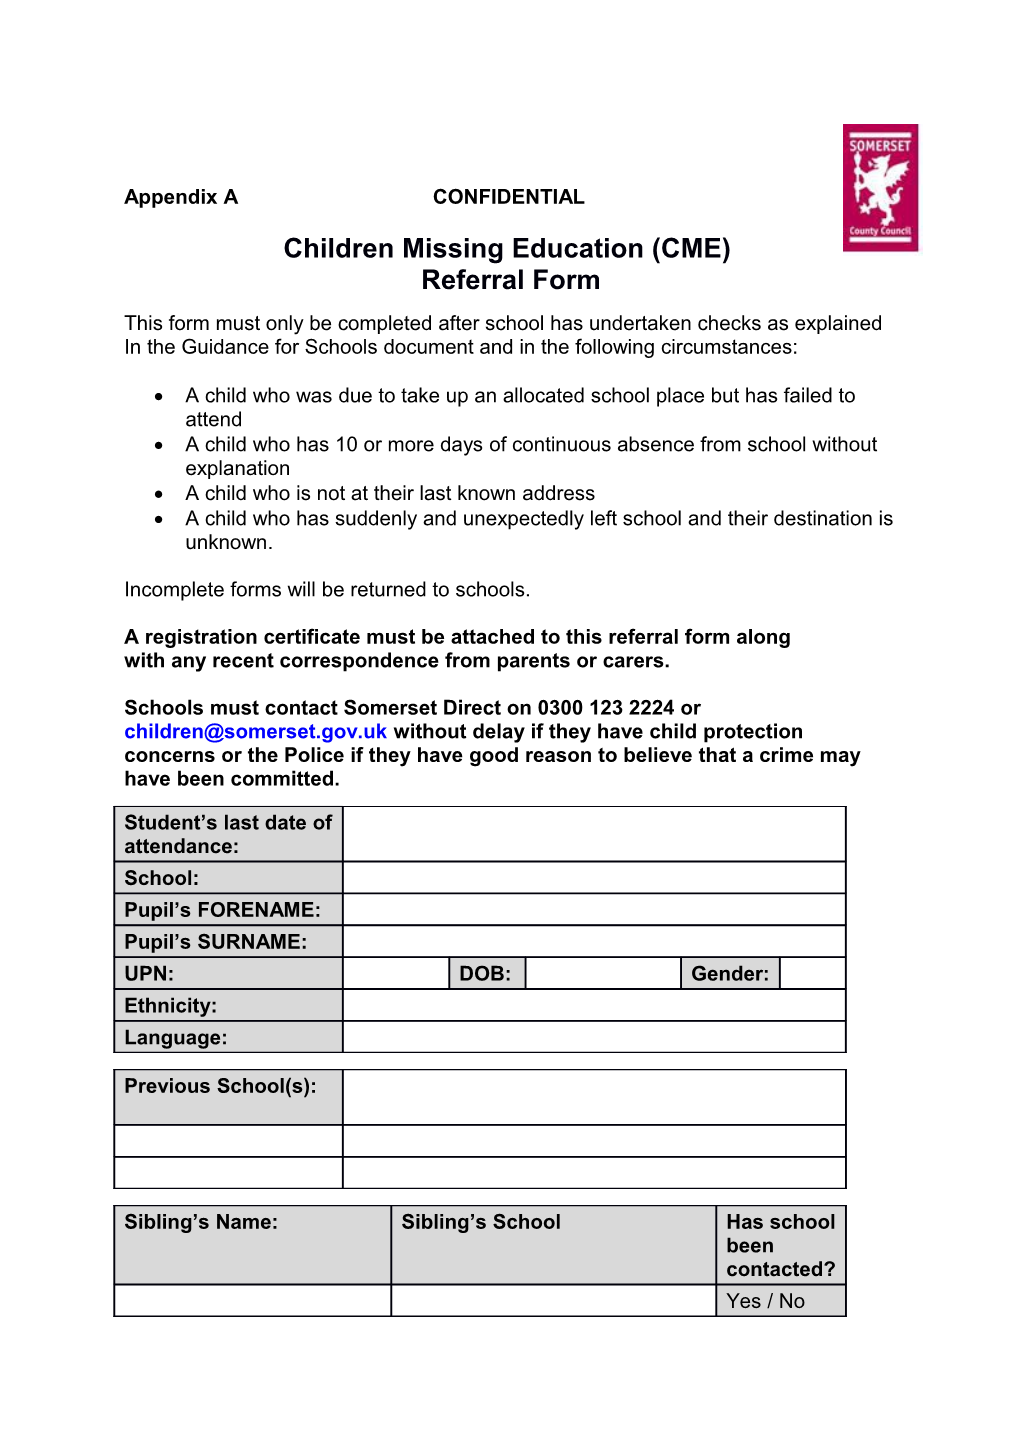 CME Referral Form